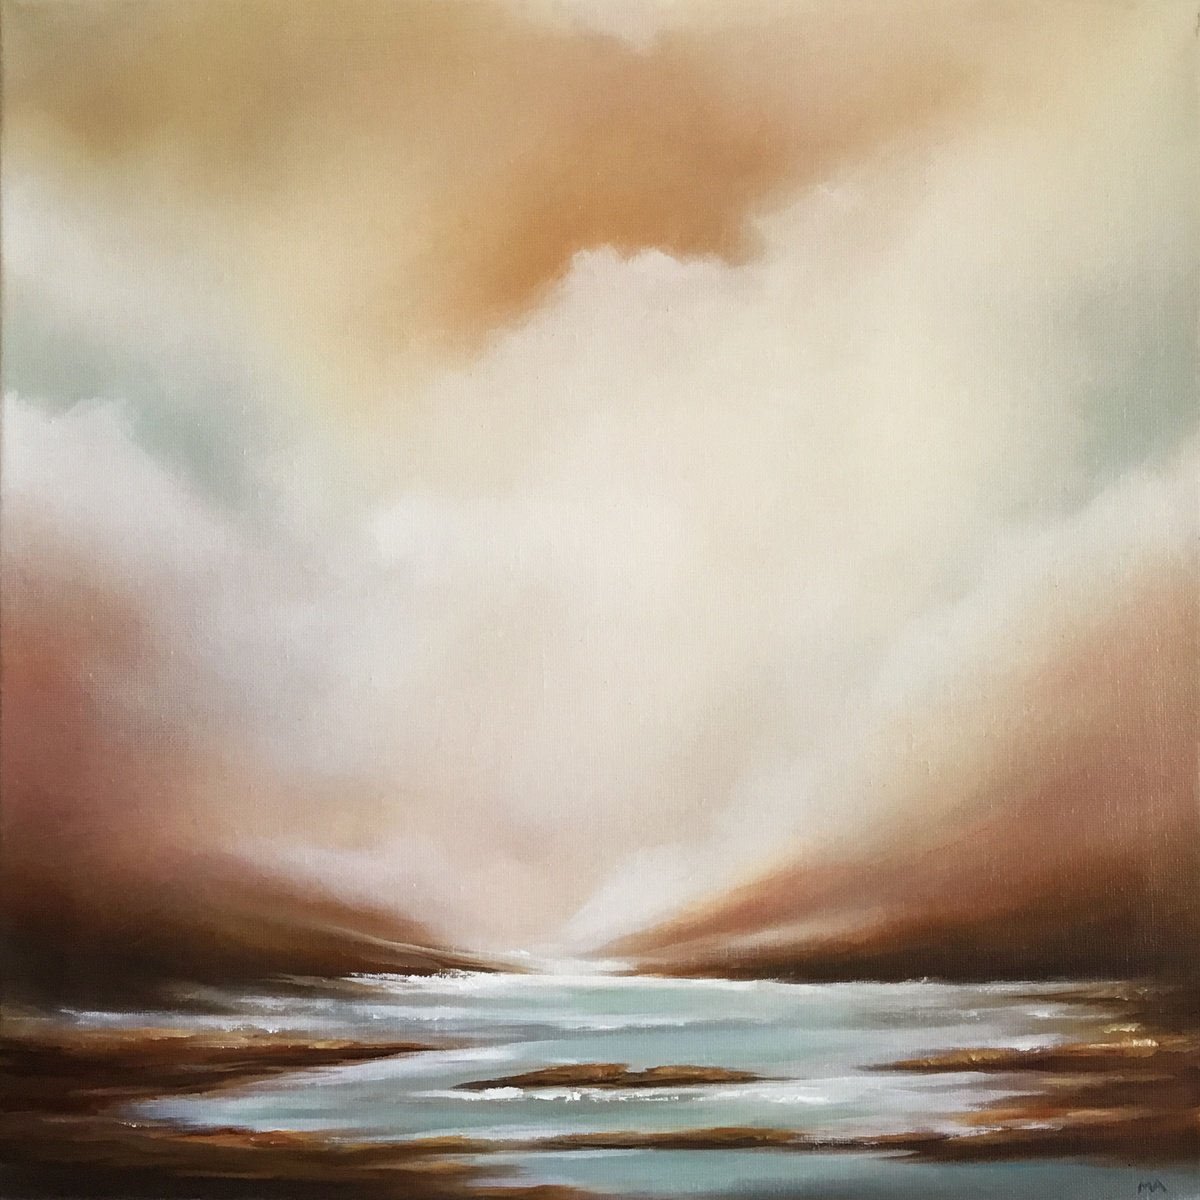 In Places We Dream - Original Seascape Oil Painting on Stretched Canvas by MULLO ART